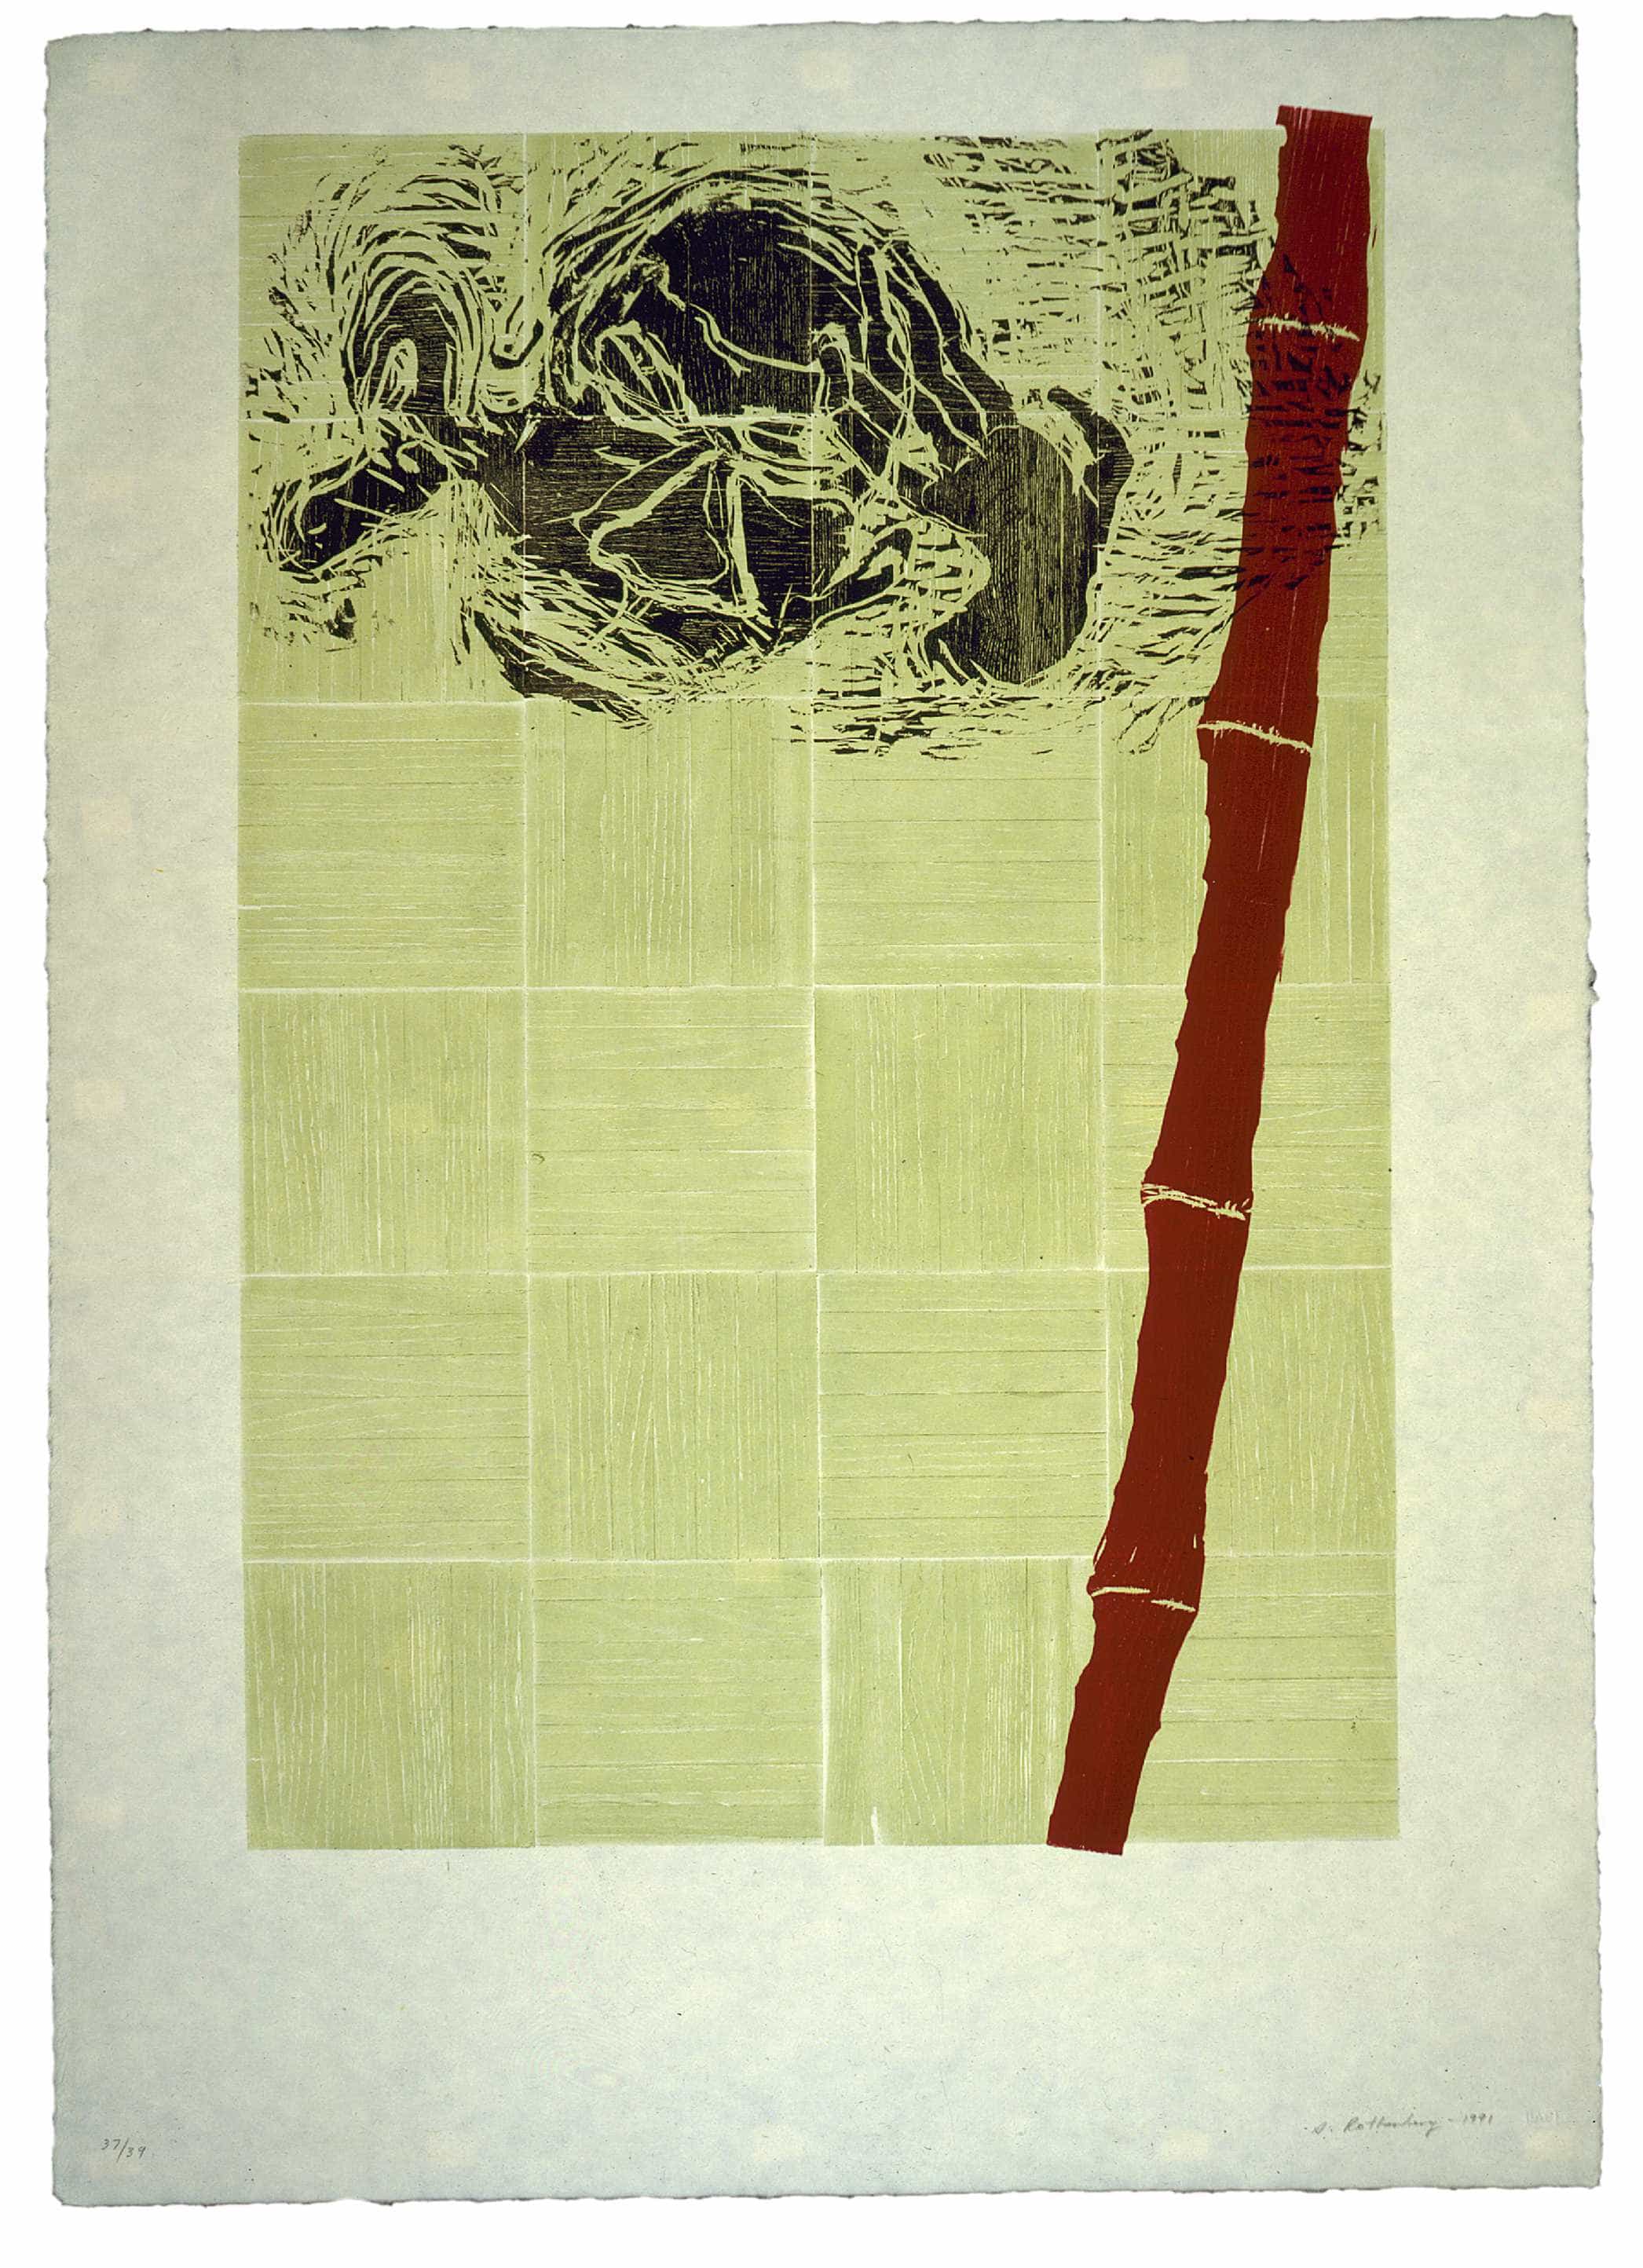 Susan Rothenberg, Red Bamboo, 1991